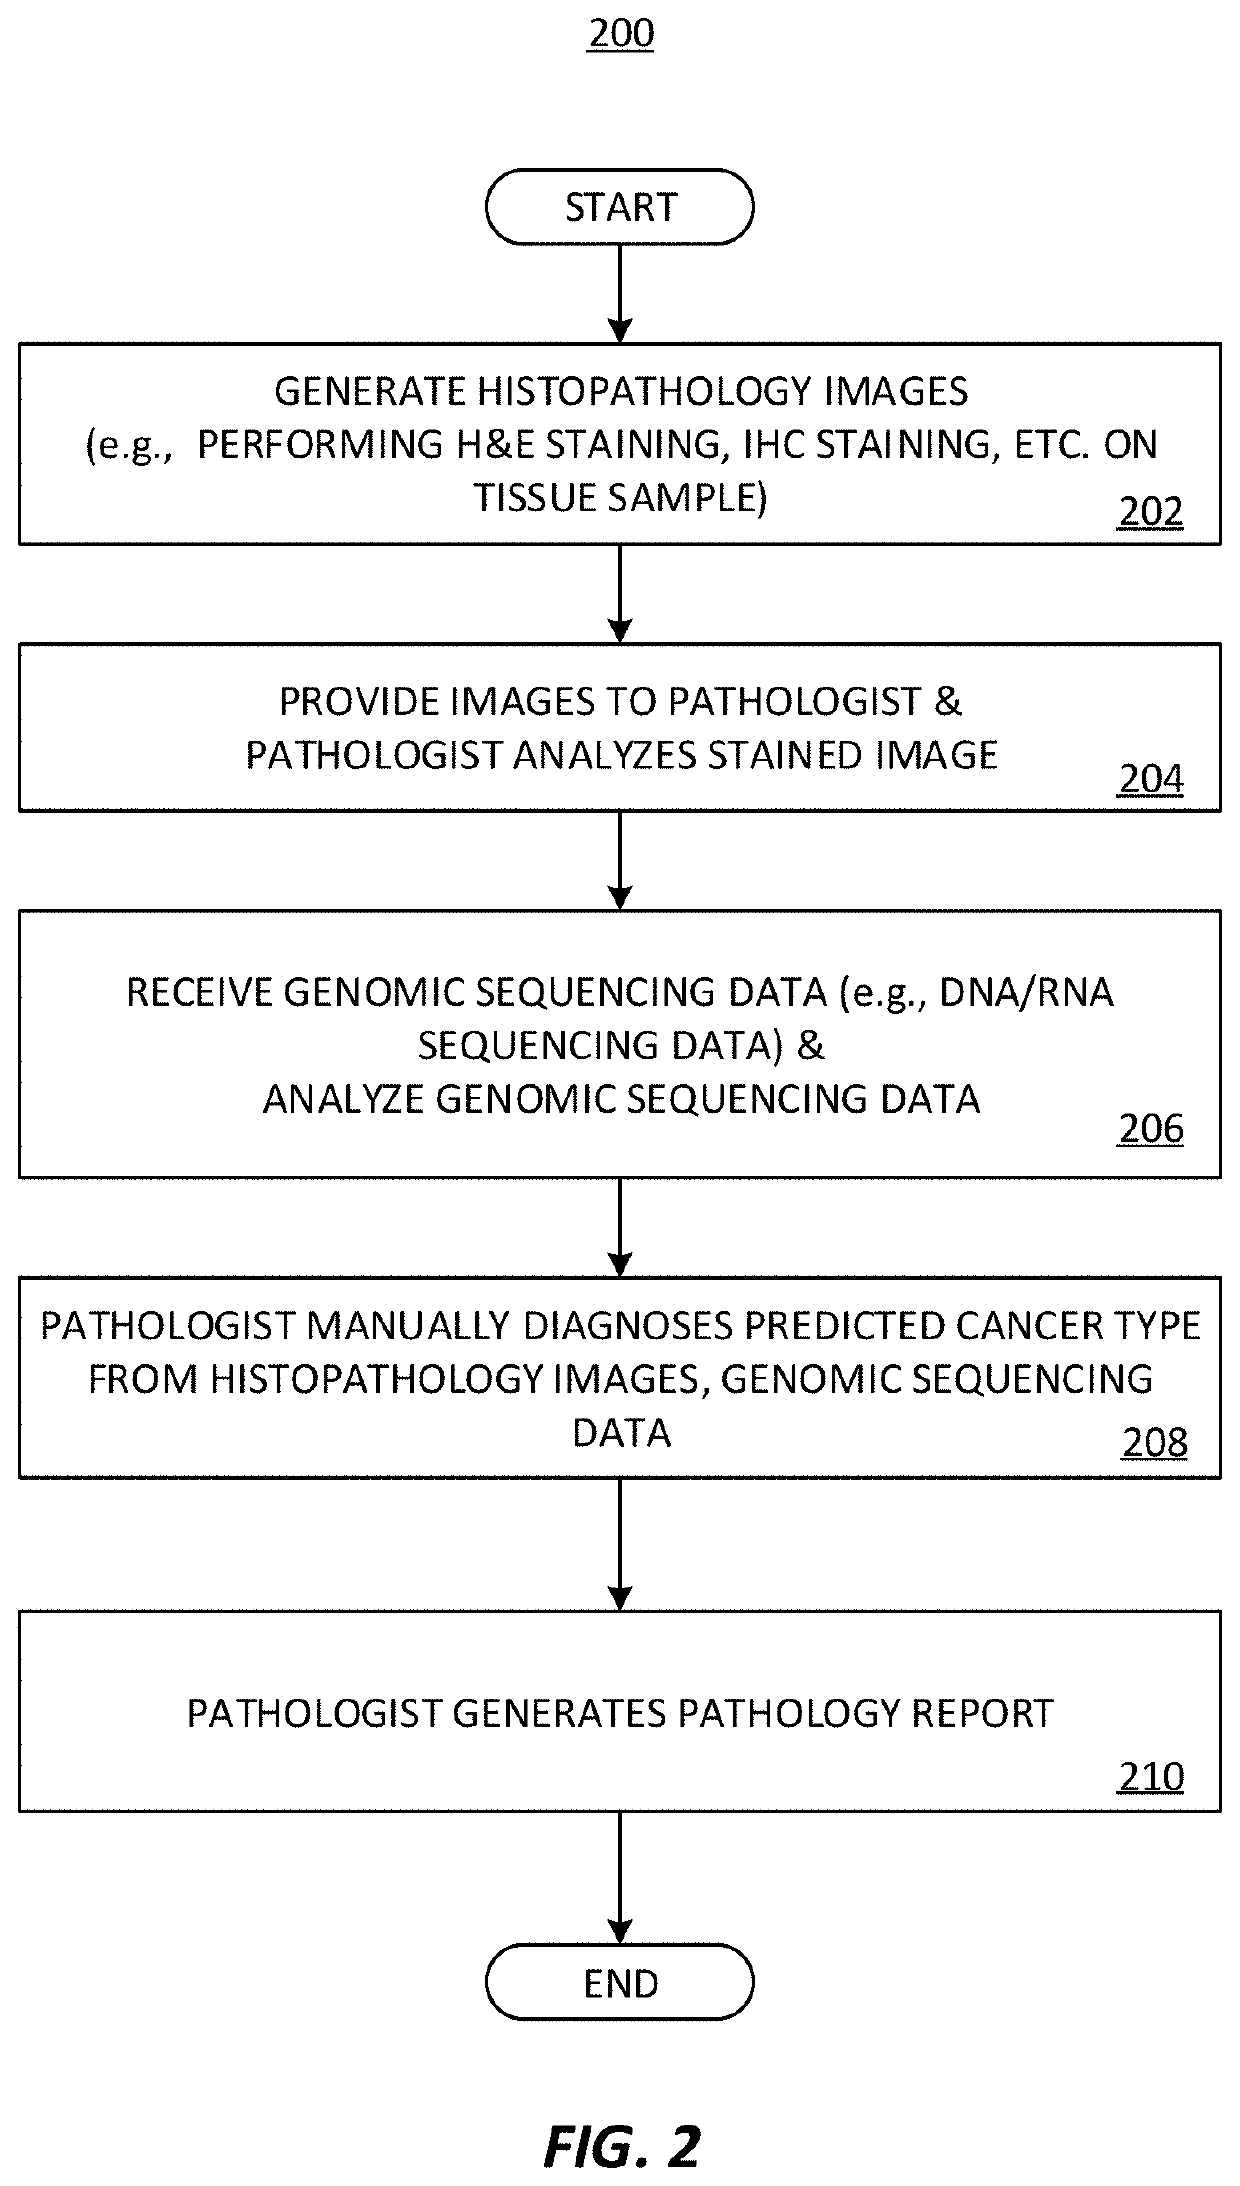 Predicting total nucleic acid yield and dissection boundaries for histology slides